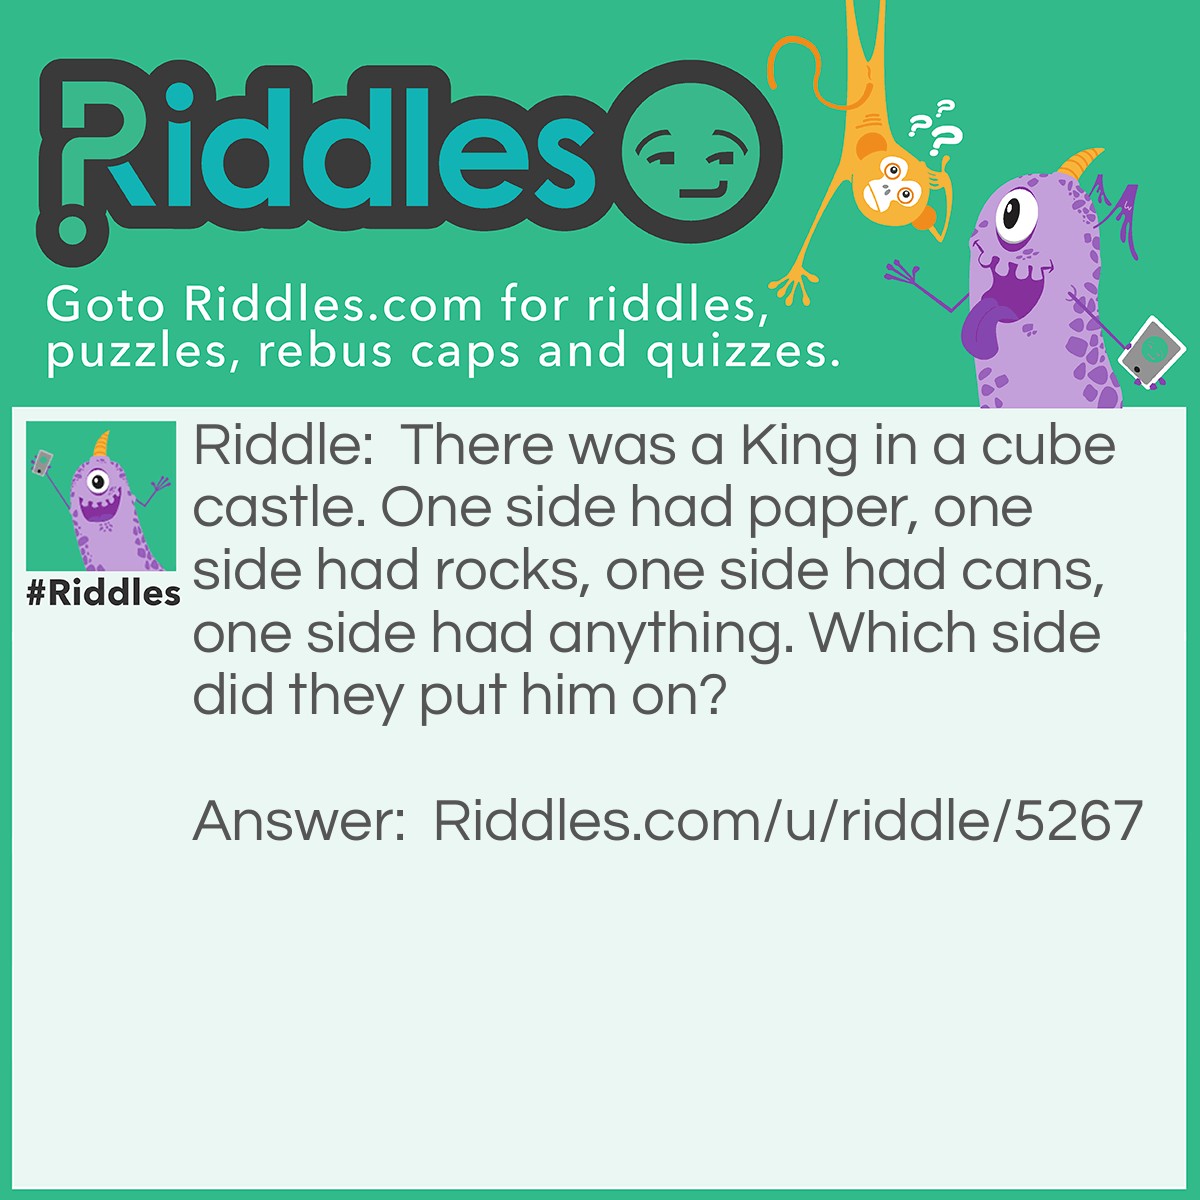 Riddle: There was a King in a cube castle. One side had paper, one side had rocks, one side had cans, one side had anything. Which side did they put him on? Answer: Not even one, because He was dead already.